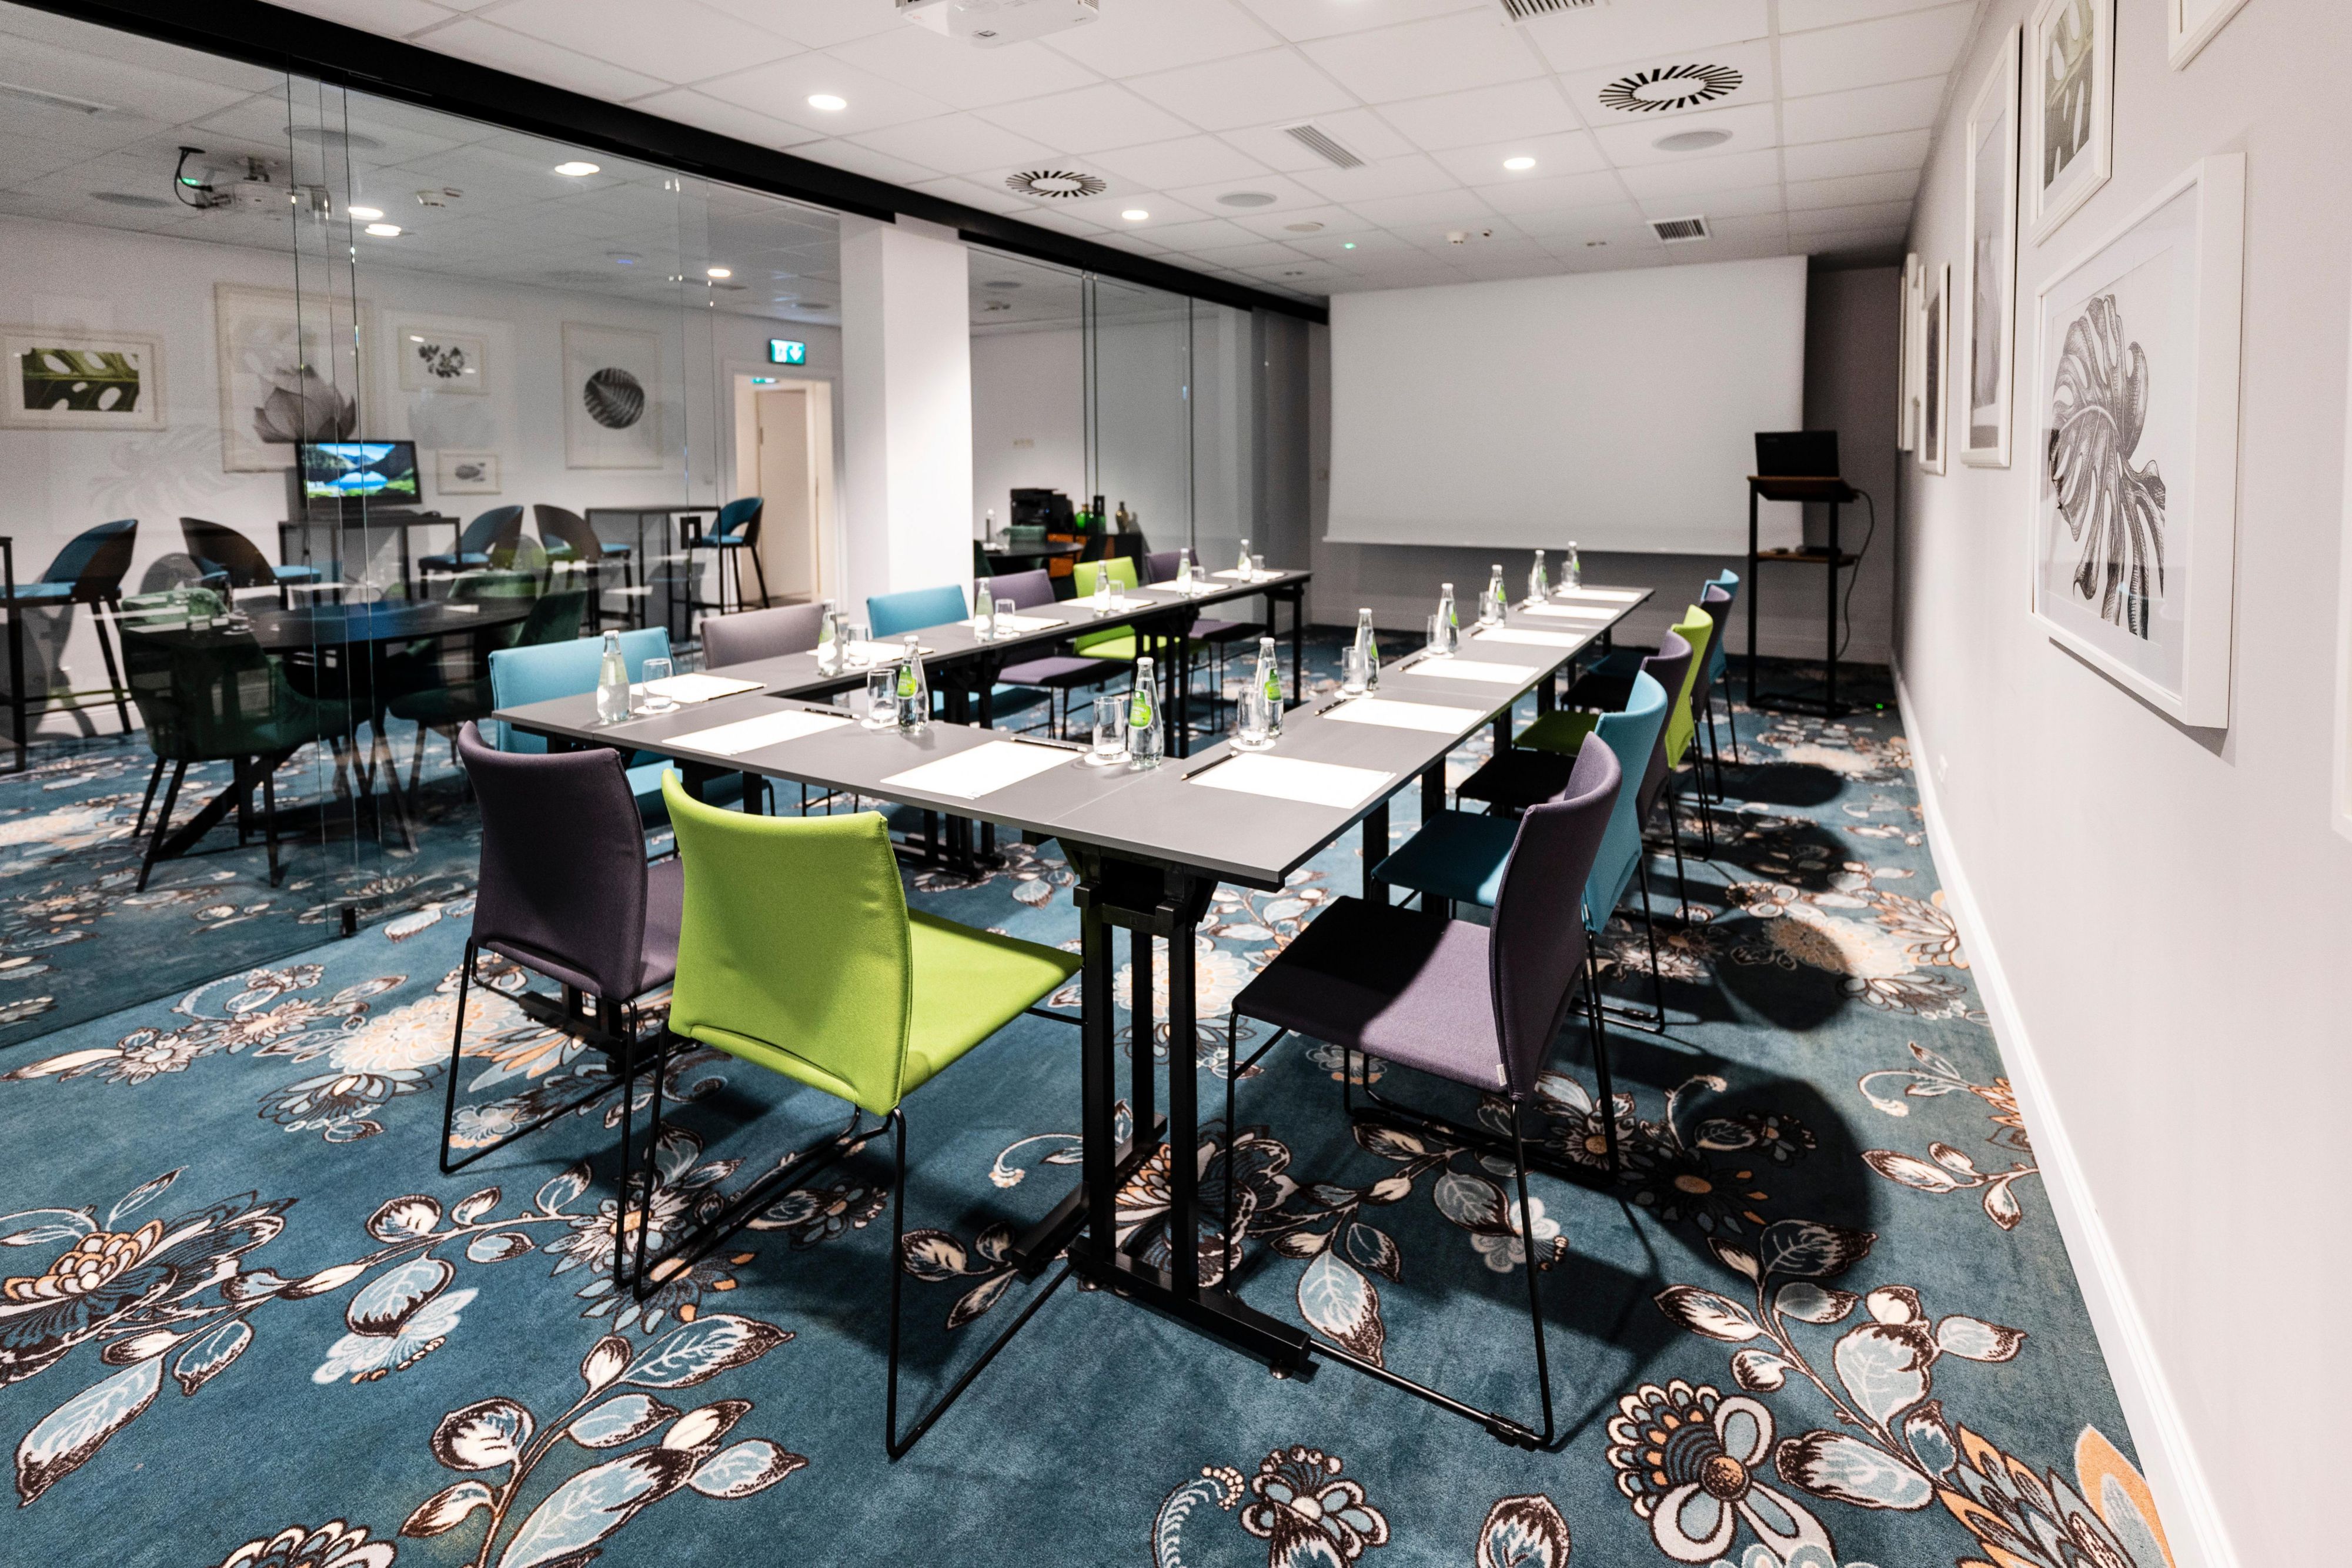 Hotel Indigo Krakow Old Town is the perfect place for a business meeting or a company event. We can adapt the room to your needs creating a cozy or home-like atmosphere for your business or family meeting.